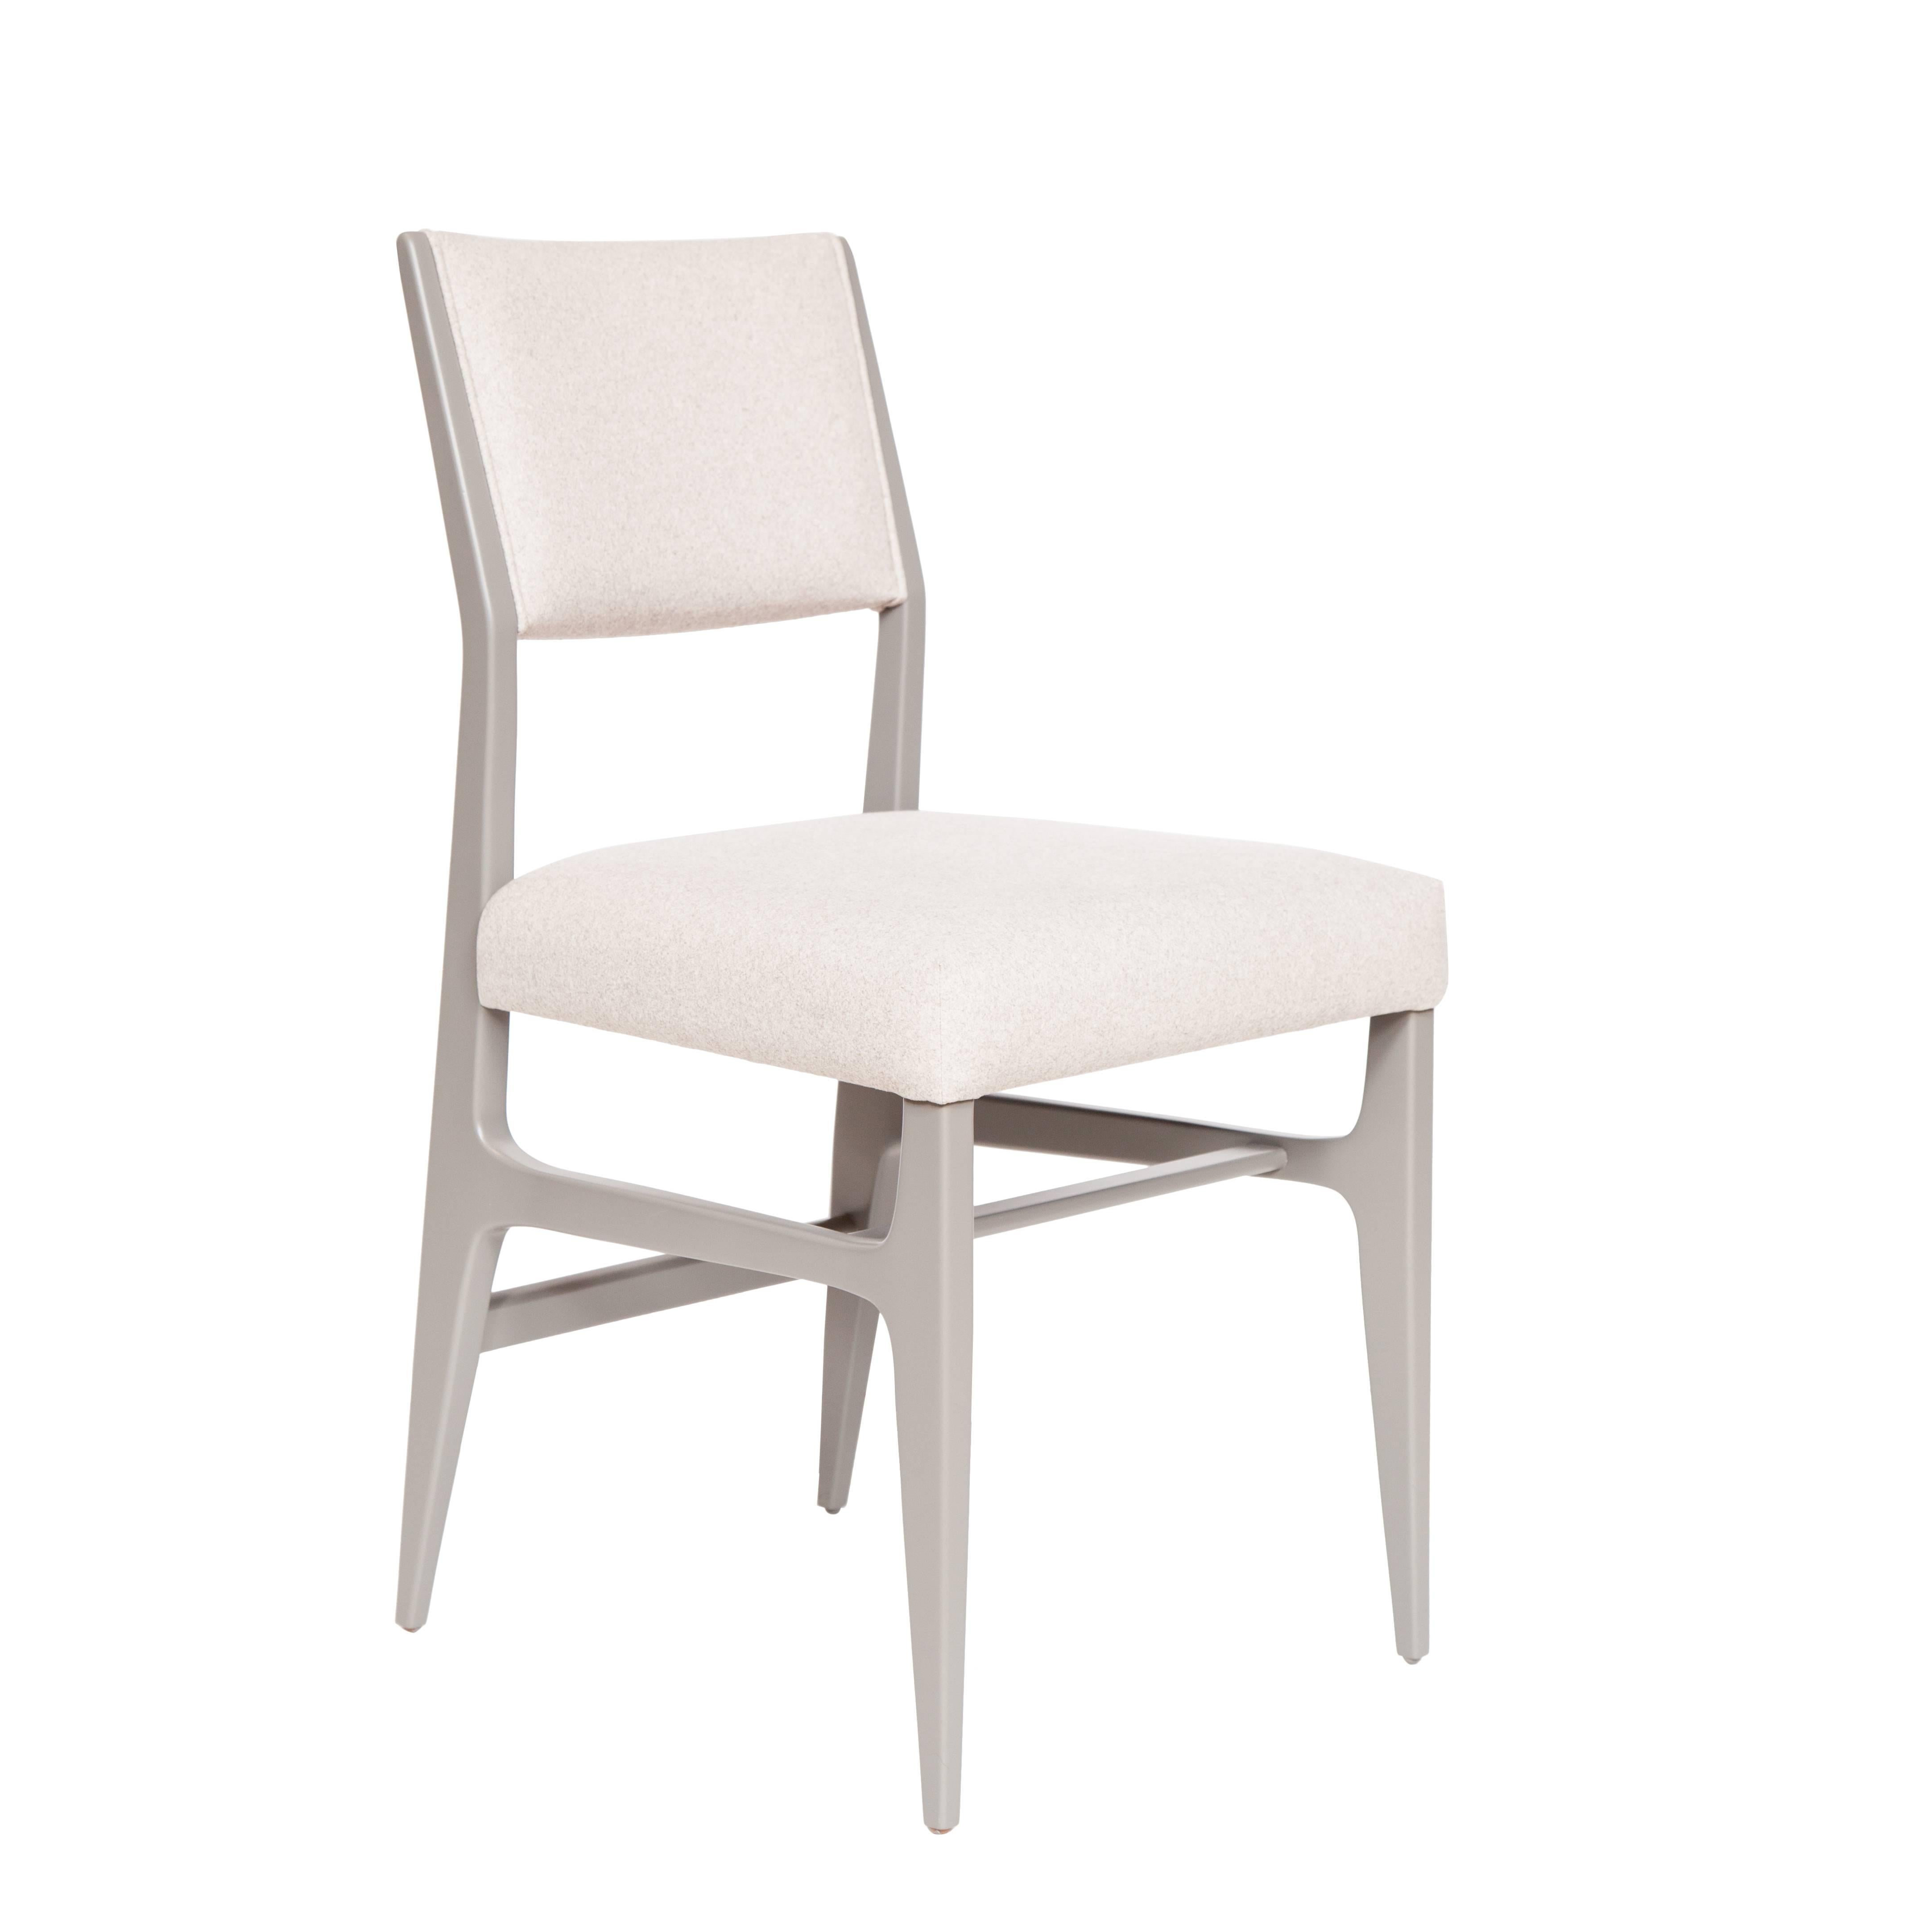 Lacquered dining chair.

Measures: Seat height 19”, 
seat depth 17”. 
COM requirements: 1.5 yards 
5% up-charge for contrasting fabrics and or welting 
COL Requirements: 30 sq. feet 
5% percentage up-charge for all COL or exotic